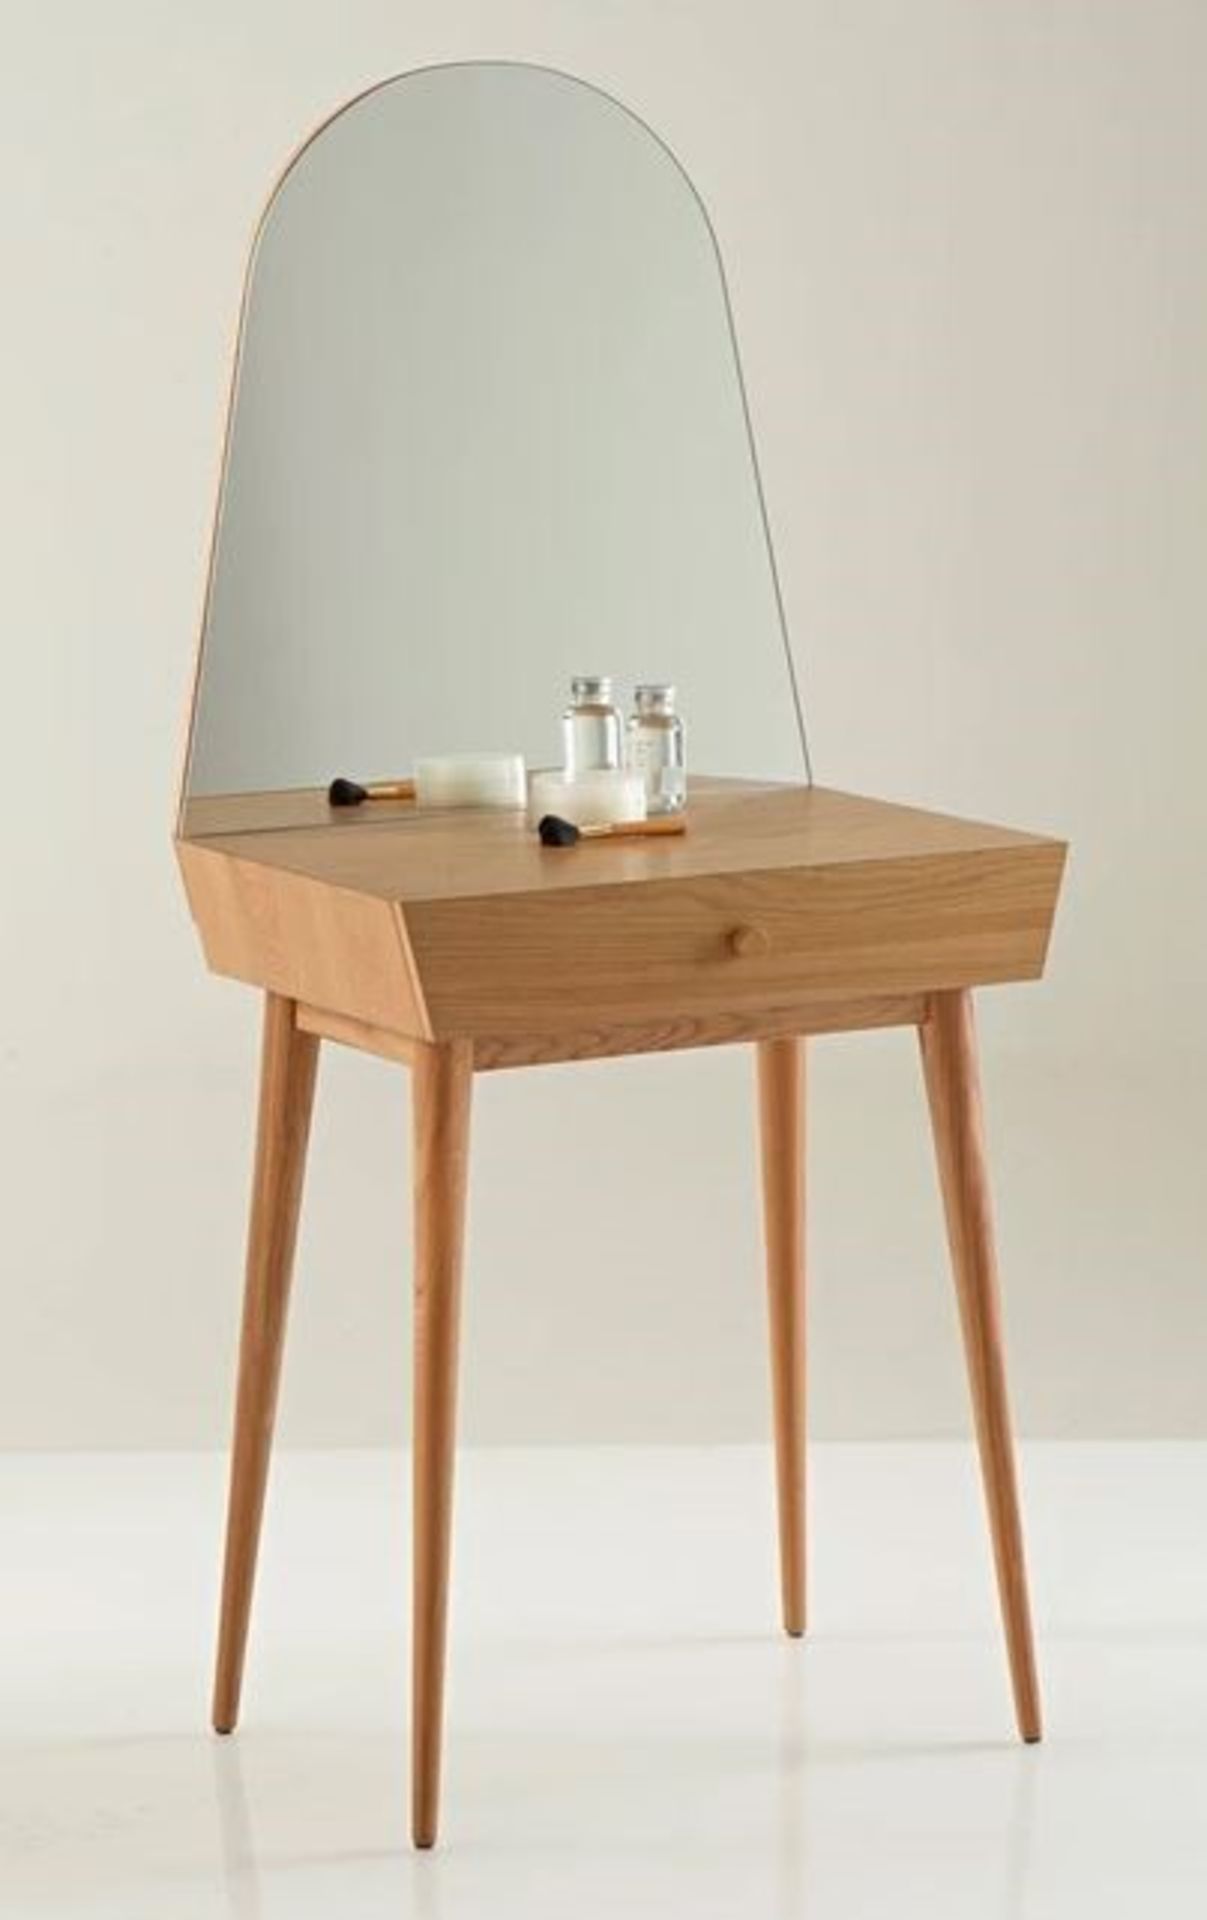 1 GRADE B BOXED DESIGNER CLAIROY 1 DRAWER SCANDI STYLE DRESSING TABLE IN OAK / RRP £165.00 **NO - Image 2 of 2